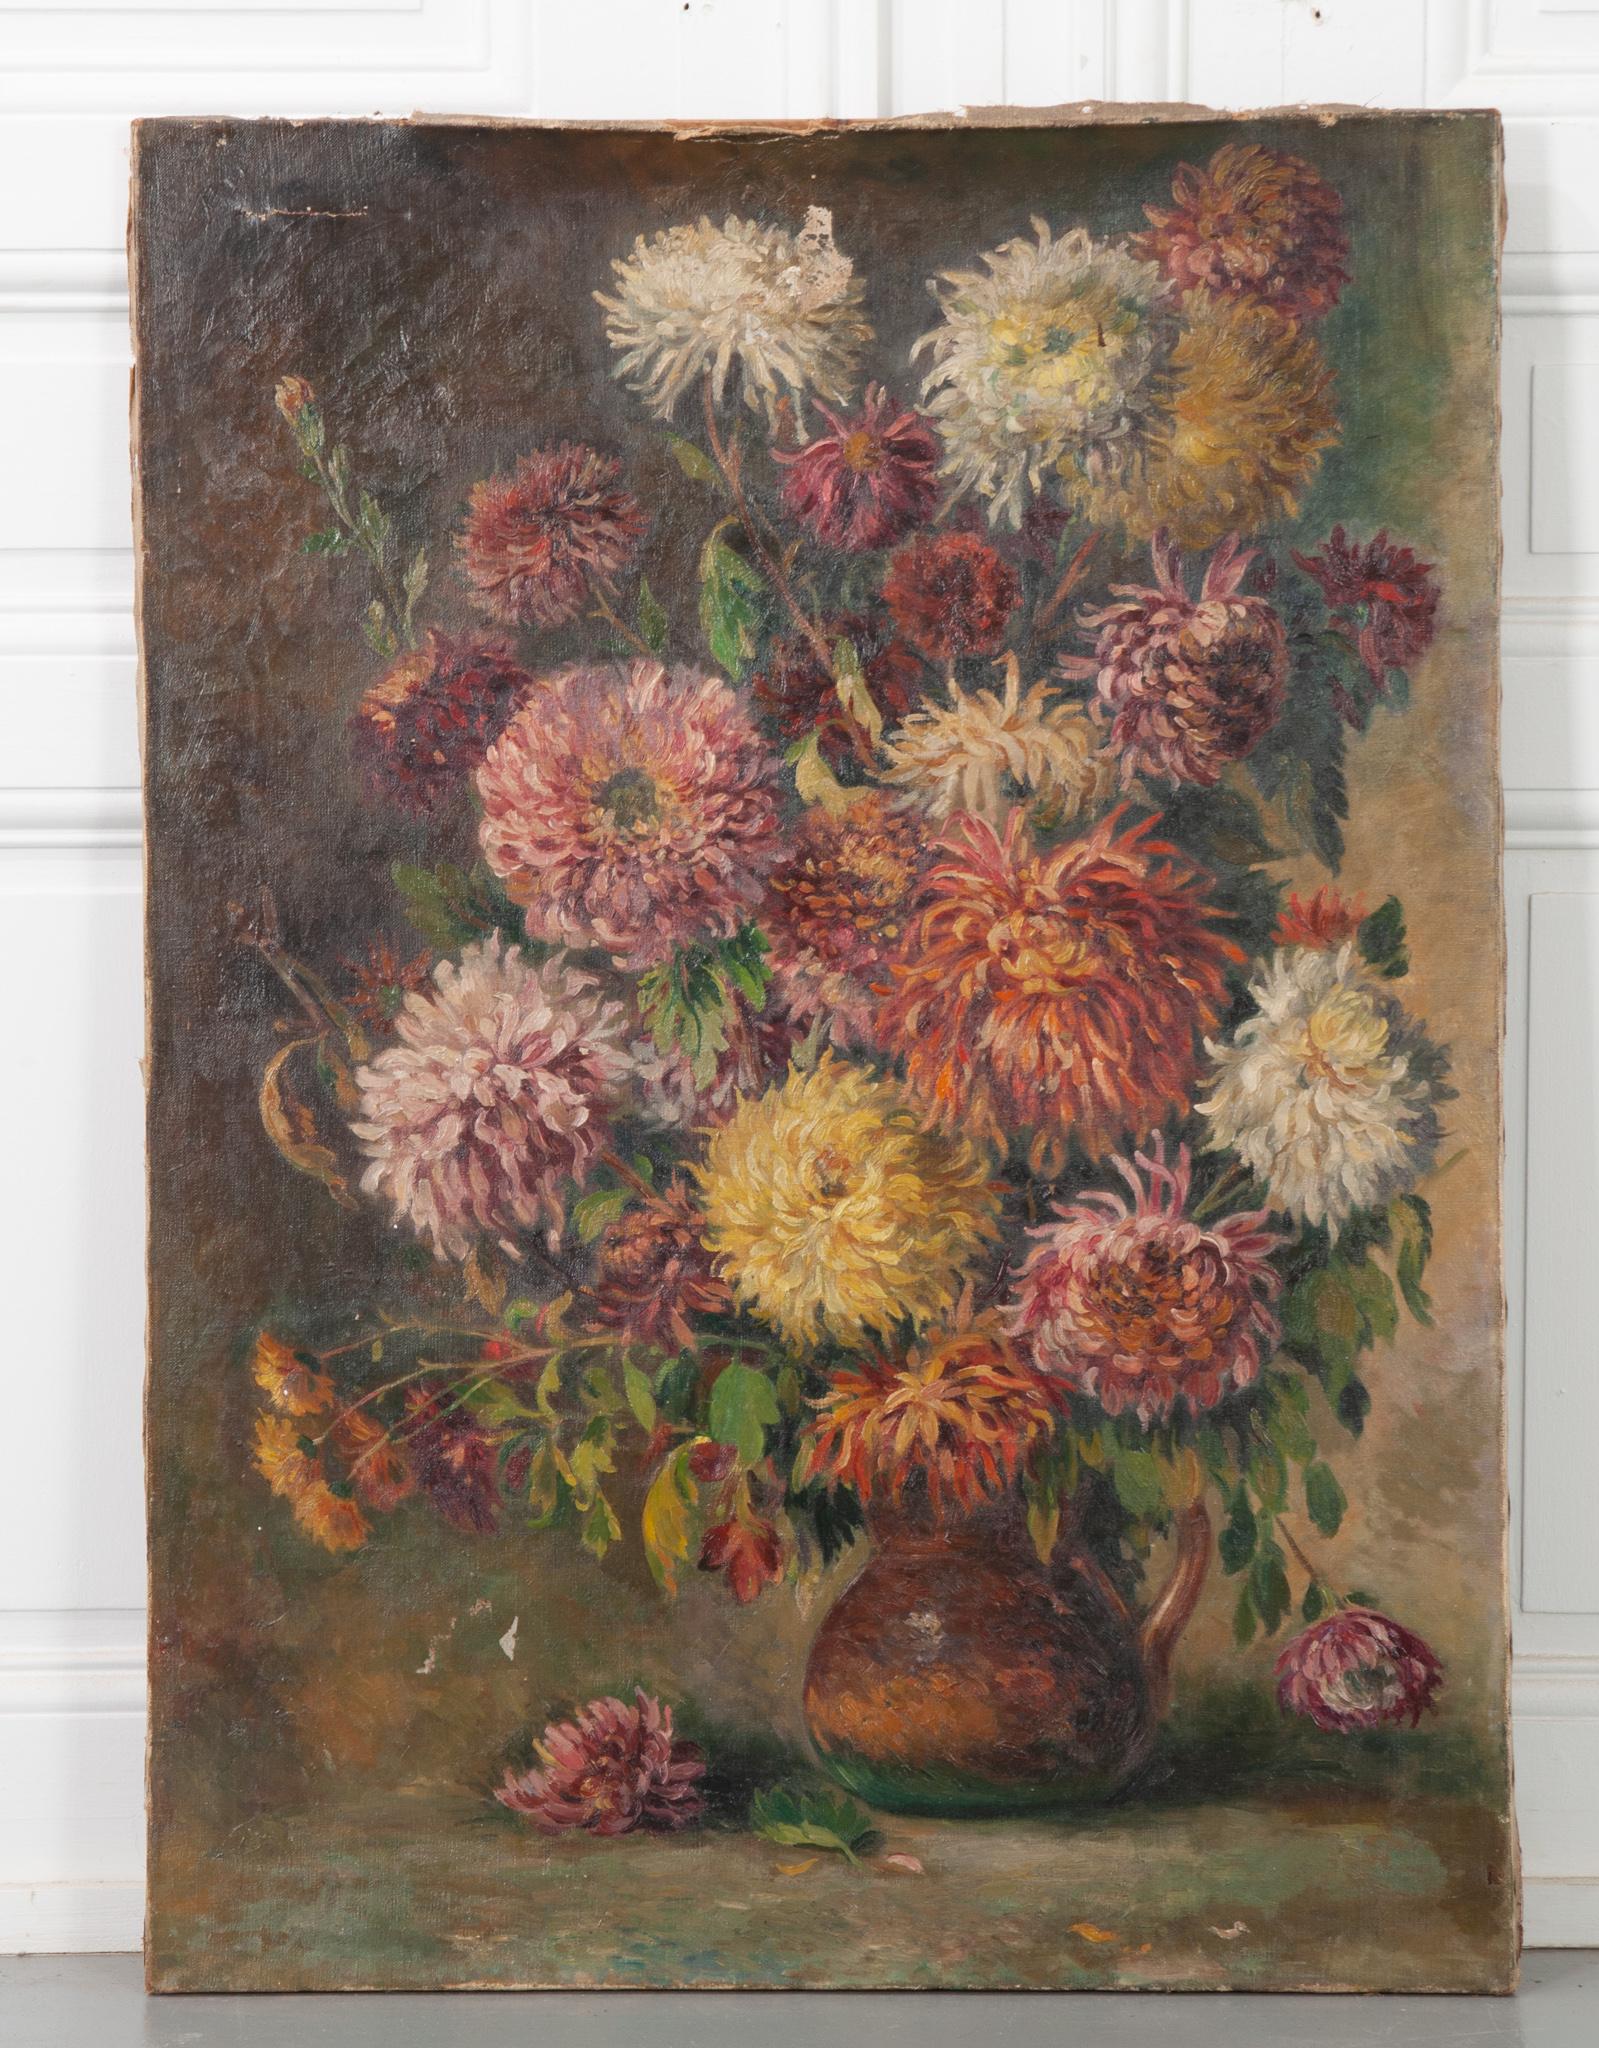 Oil on canvas painting of an overflowing vase of colorful mums, set against a shadowy abstract background. A few repairs to the canvas have been made over the years but are only visible on the back. The soft, colorful brush strokes give this